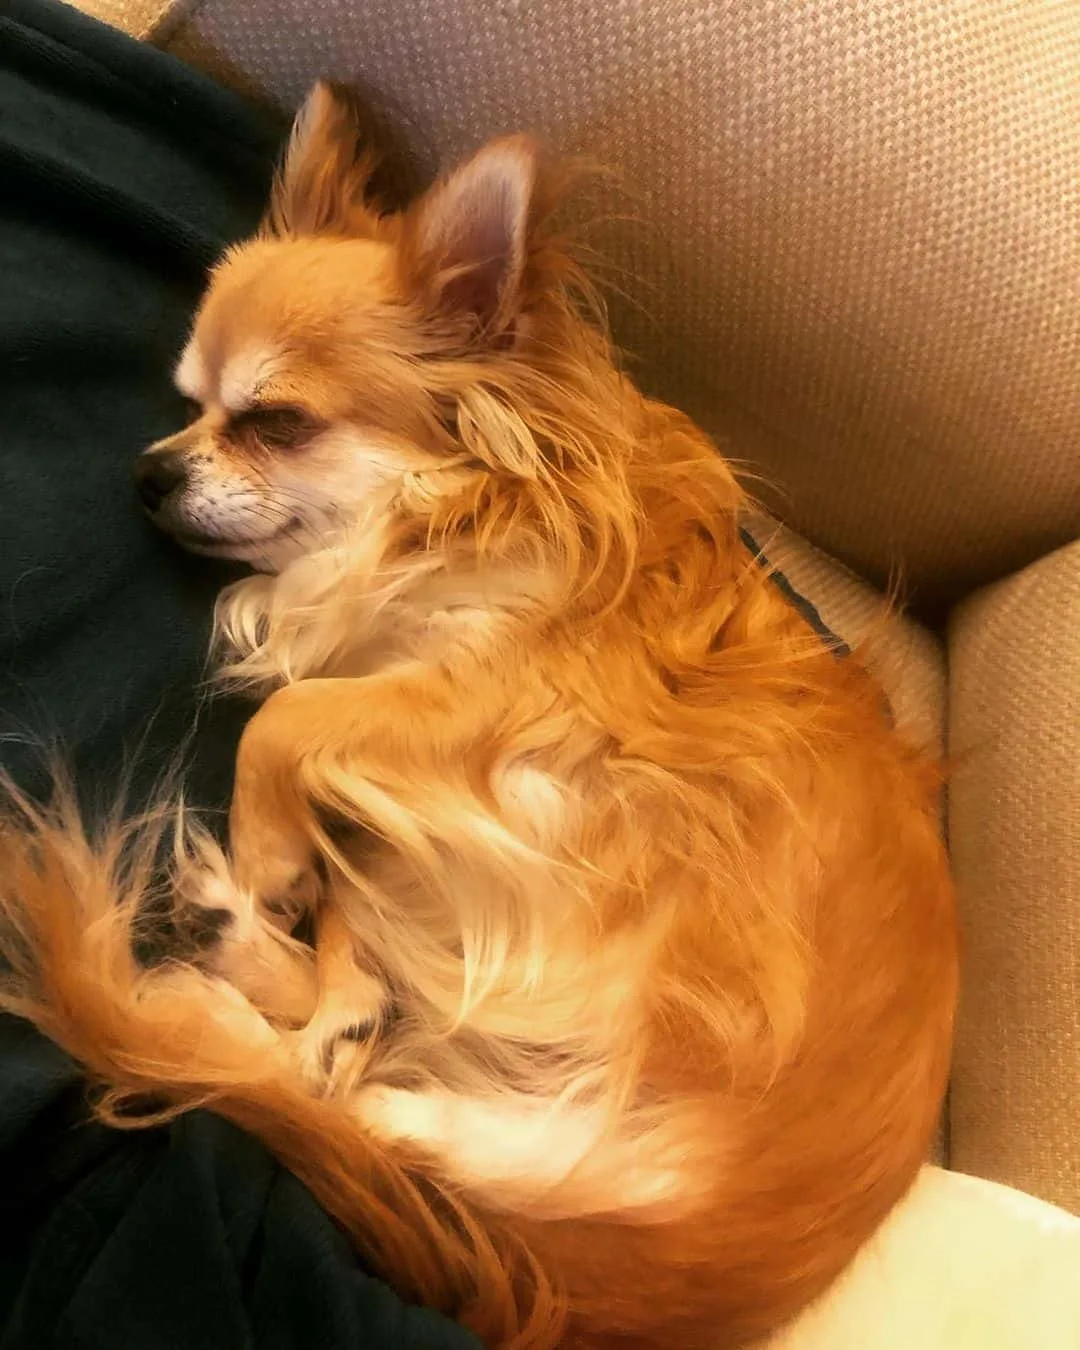 Red Chihuahua is lying on the couch